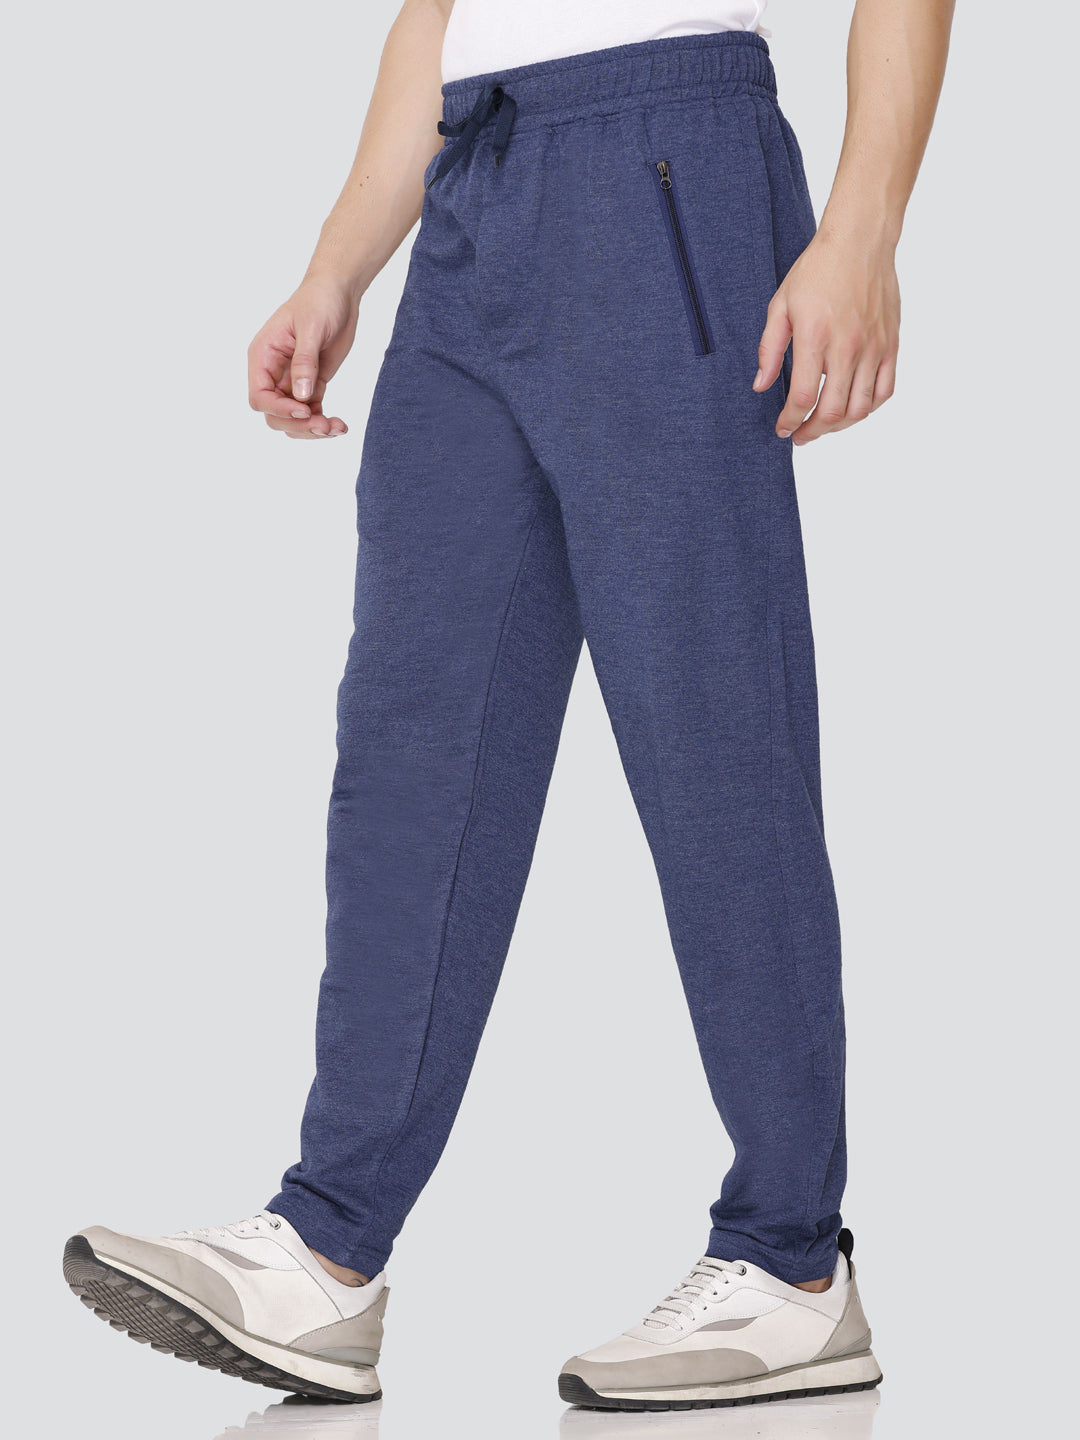 Nation Polo Club Trousers - Buy Nation Polo Club Trousers online in India